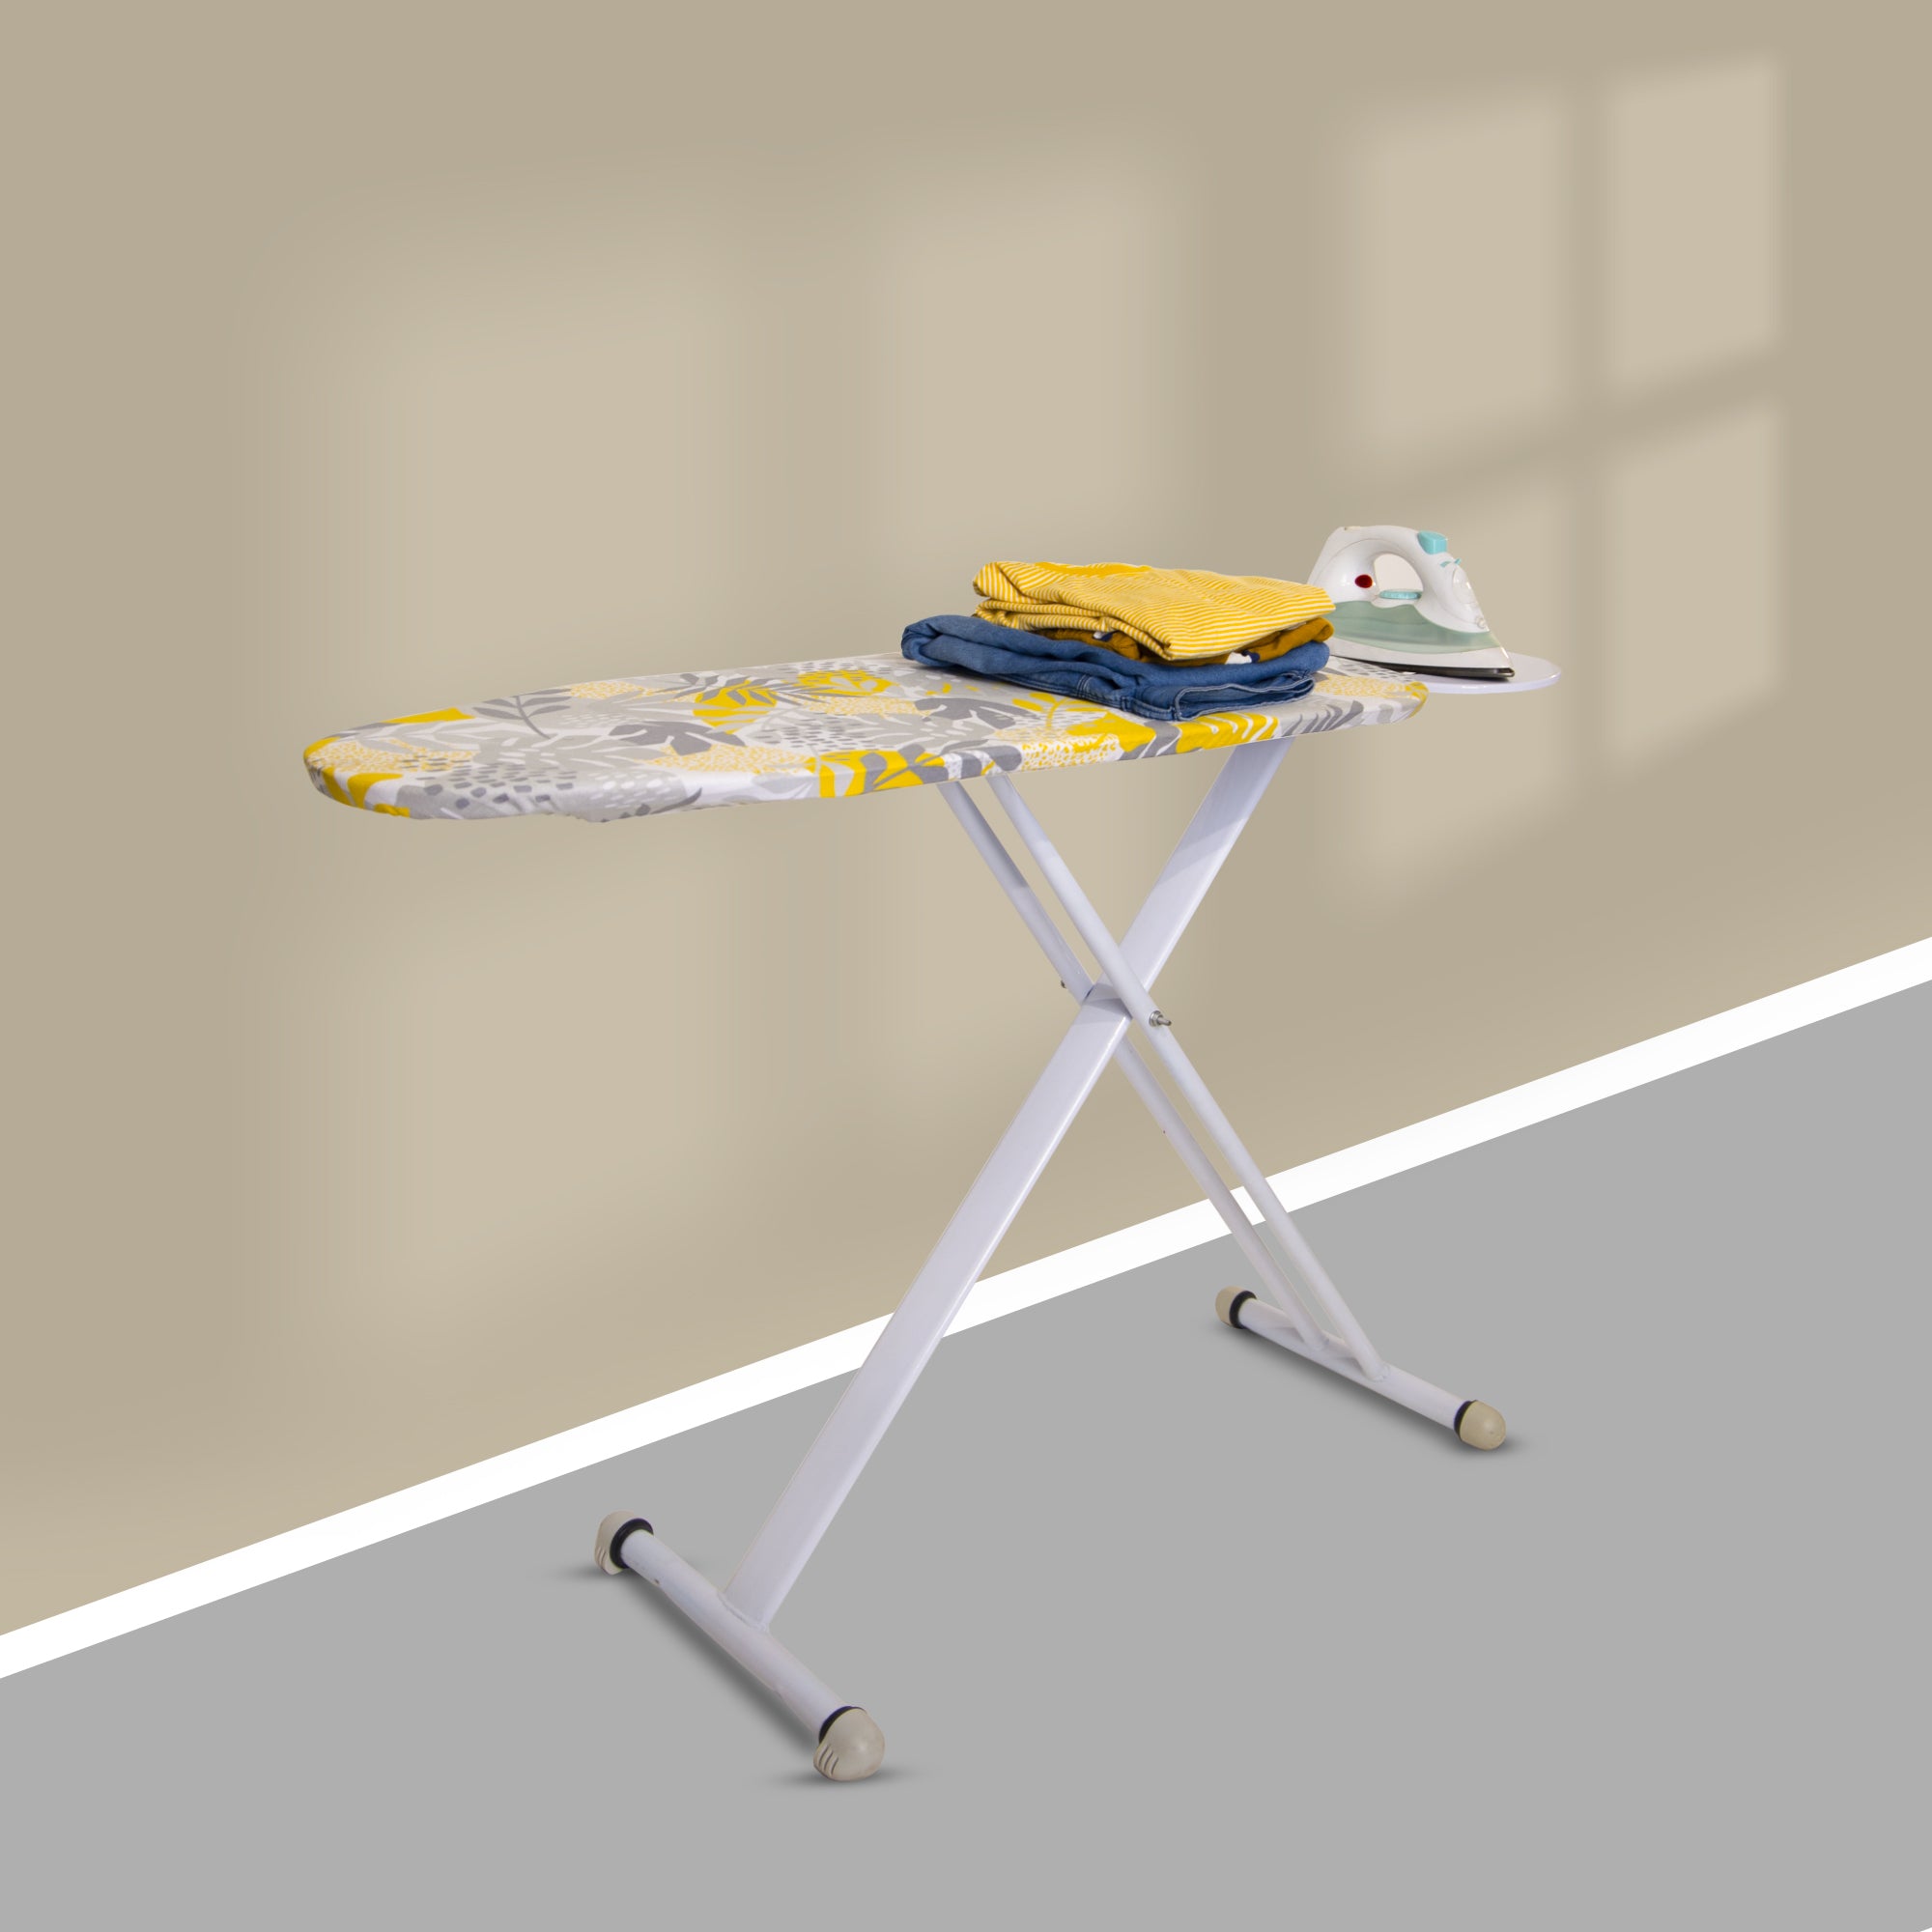 Salzburg Ironing Board | 3-Leg Small Elliptical Ironing Board with Silicone Iron Rest I Floral